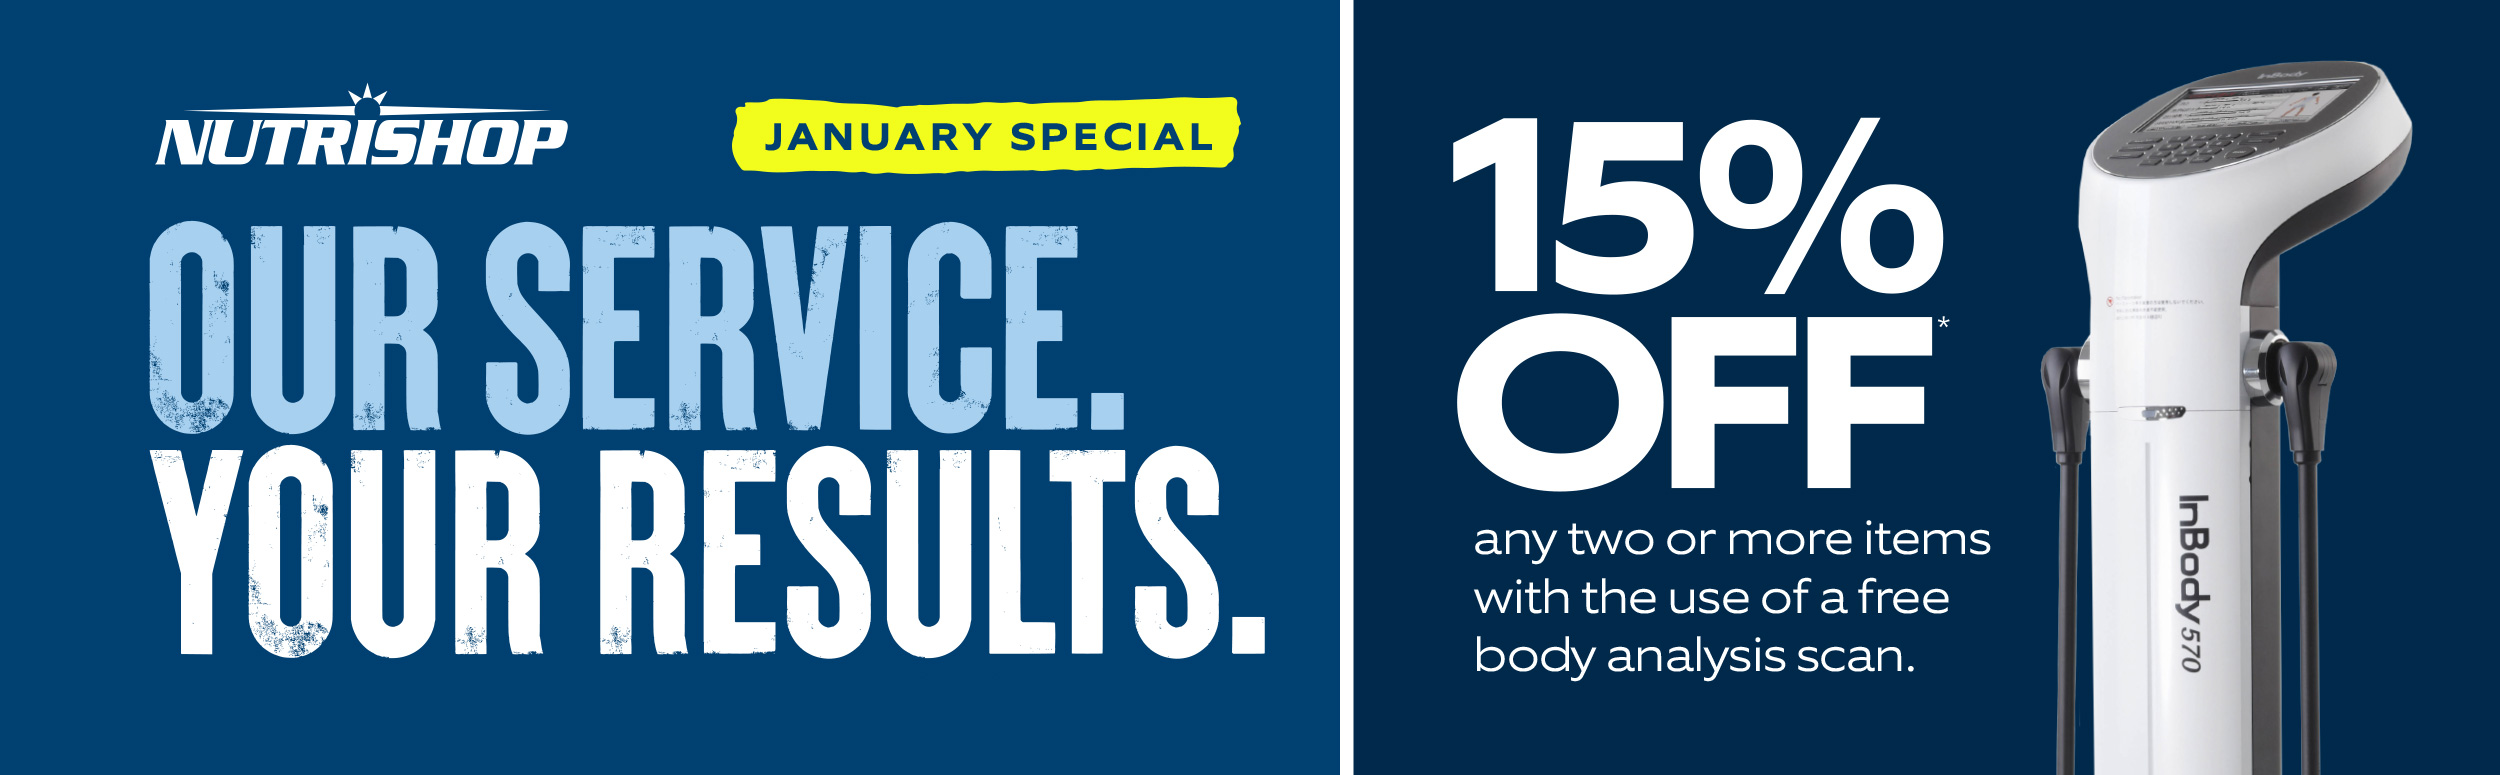 our service. your results. 15% off any two or more items with the use of a free body analysis scan.